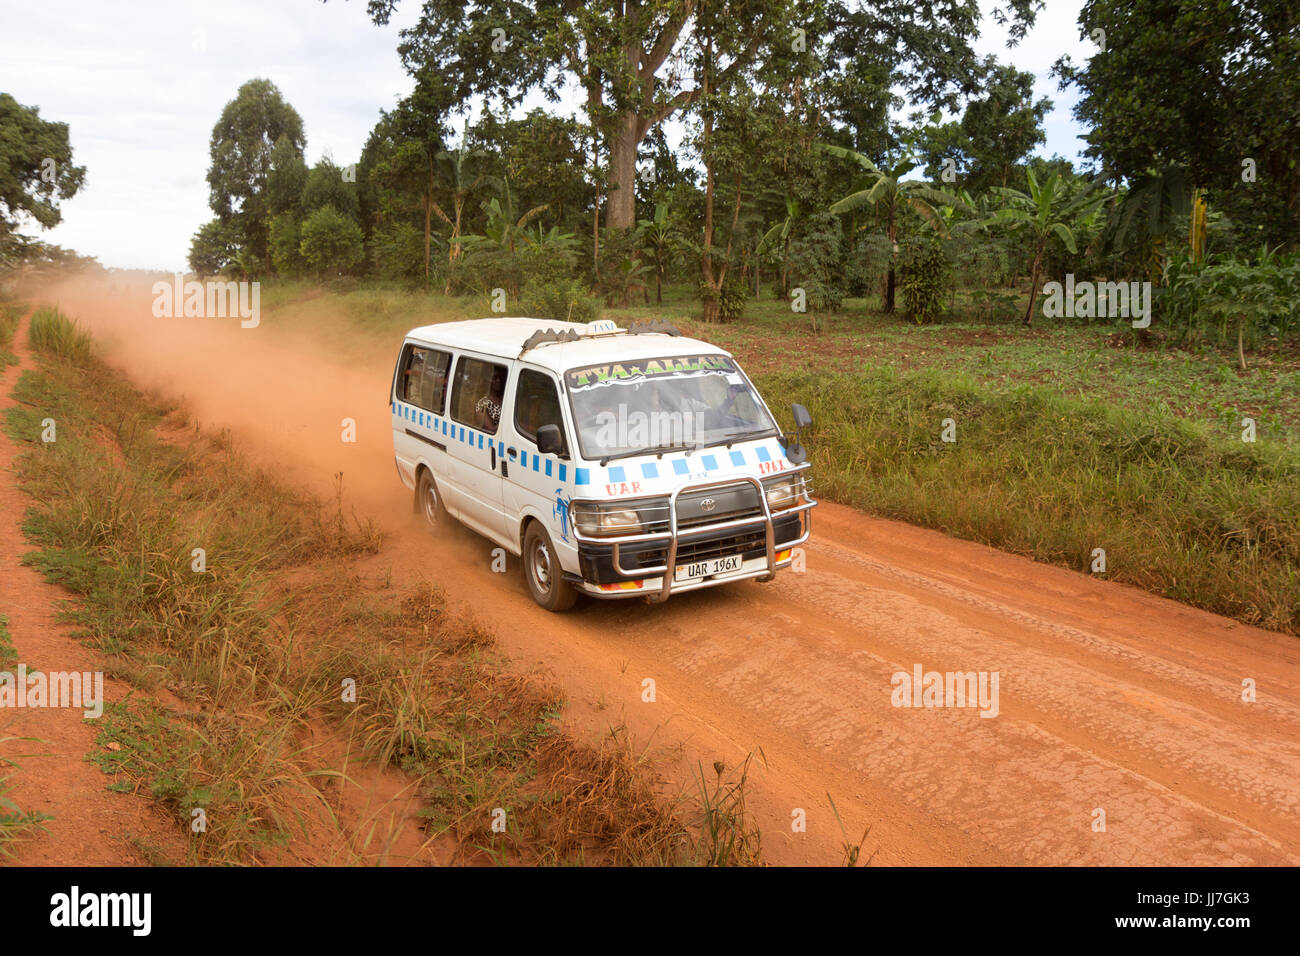 A taxi dashing by on a dirty red African road leaving a trail of dust behind it. Stock Photo